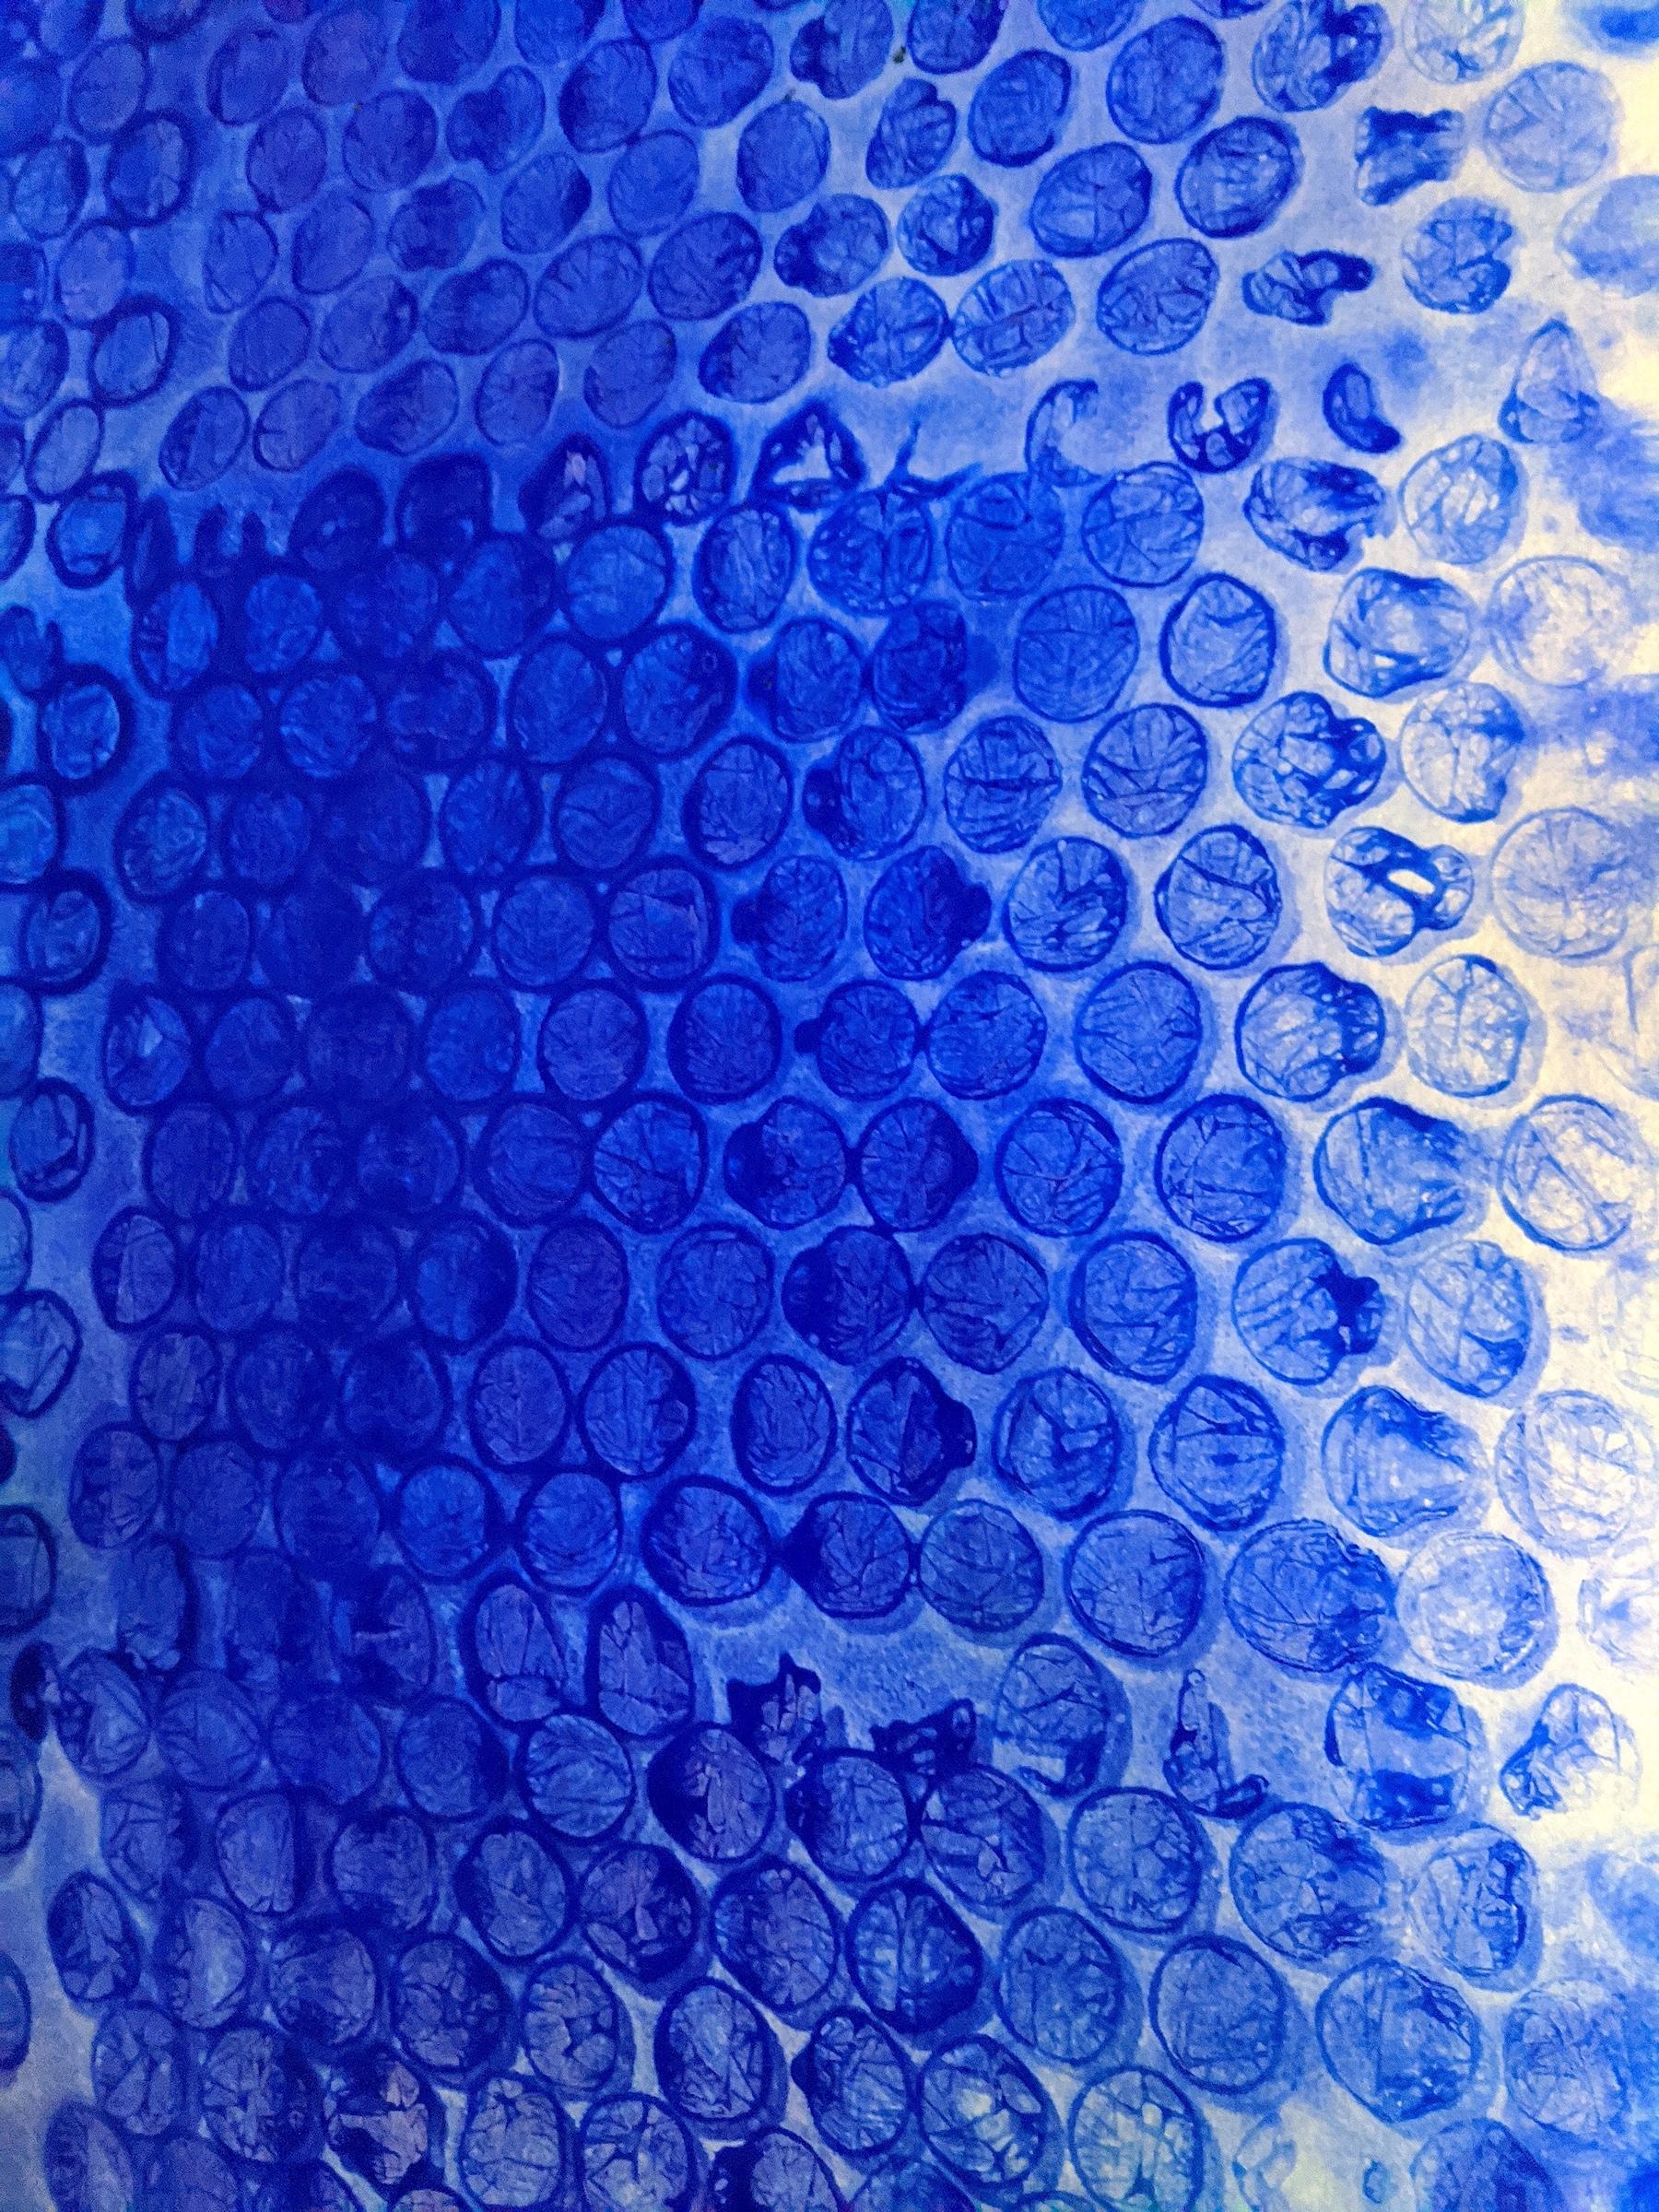 Seeking the Sound of Cobalt Blue is a series of paintings on large sheets of rag paper that have been created since January of 2014. 

Using domestic construction materials from her garage, extras from home improvement projects or the garden, have